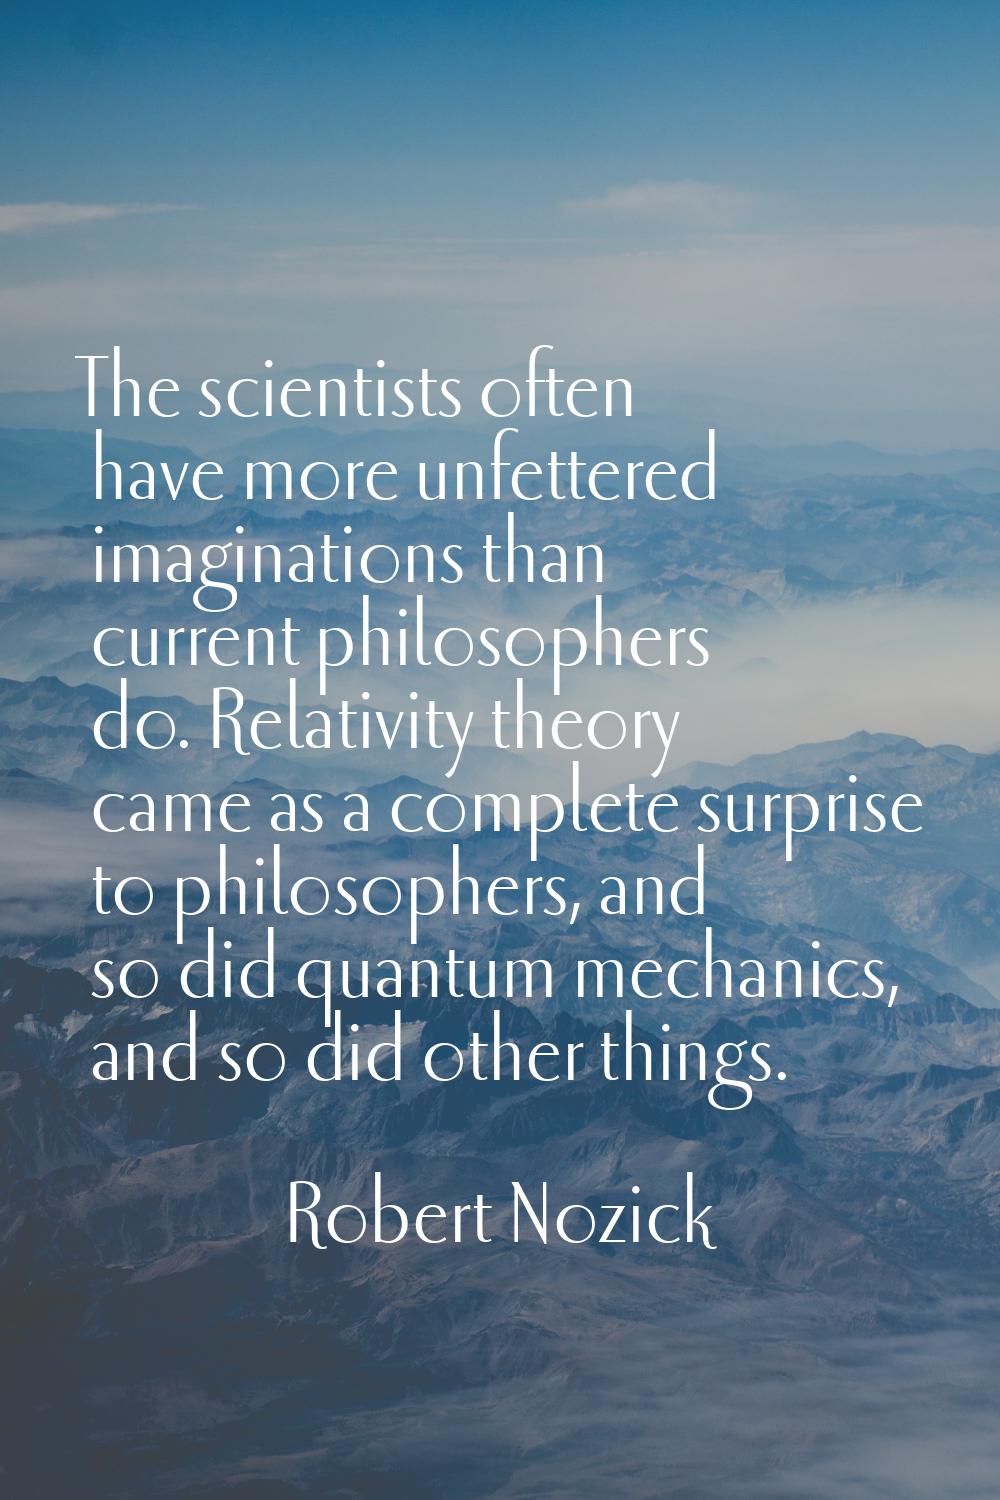 The scientists often have more unfettered imaginations than current philosophers do. Relativity the